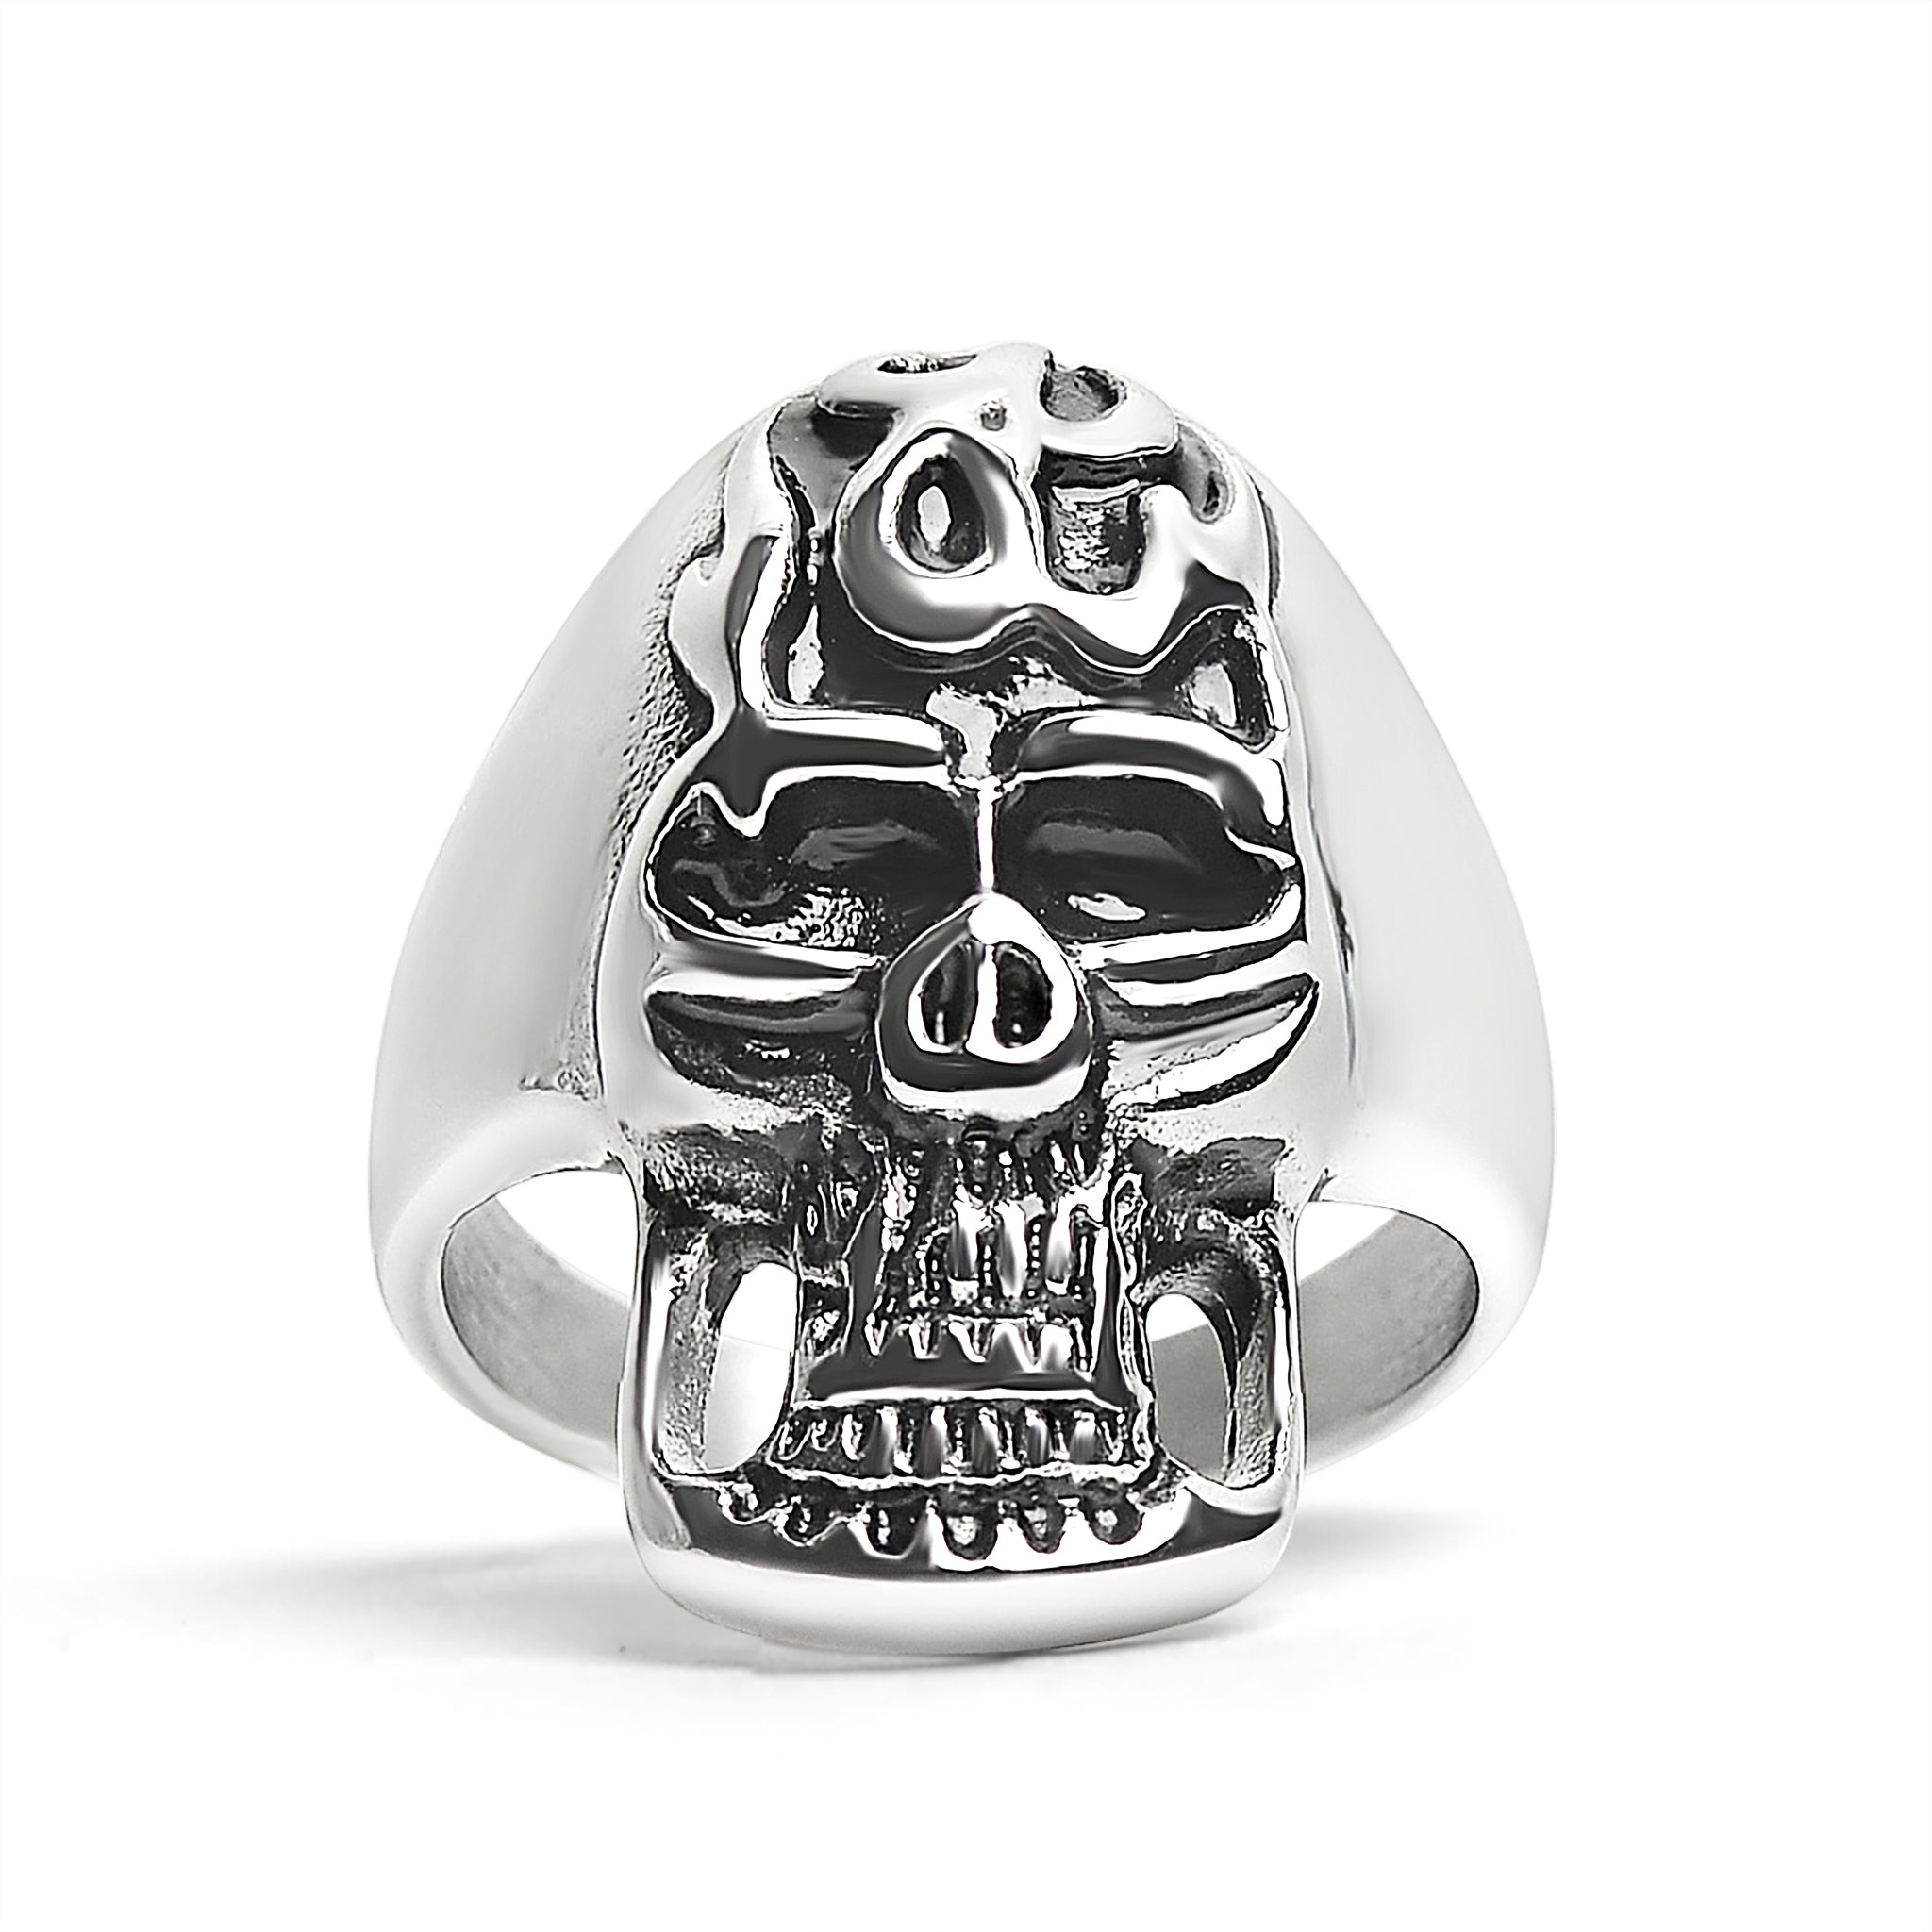 Stainless Steel Polished Flaming Skull Ring / SCR2016